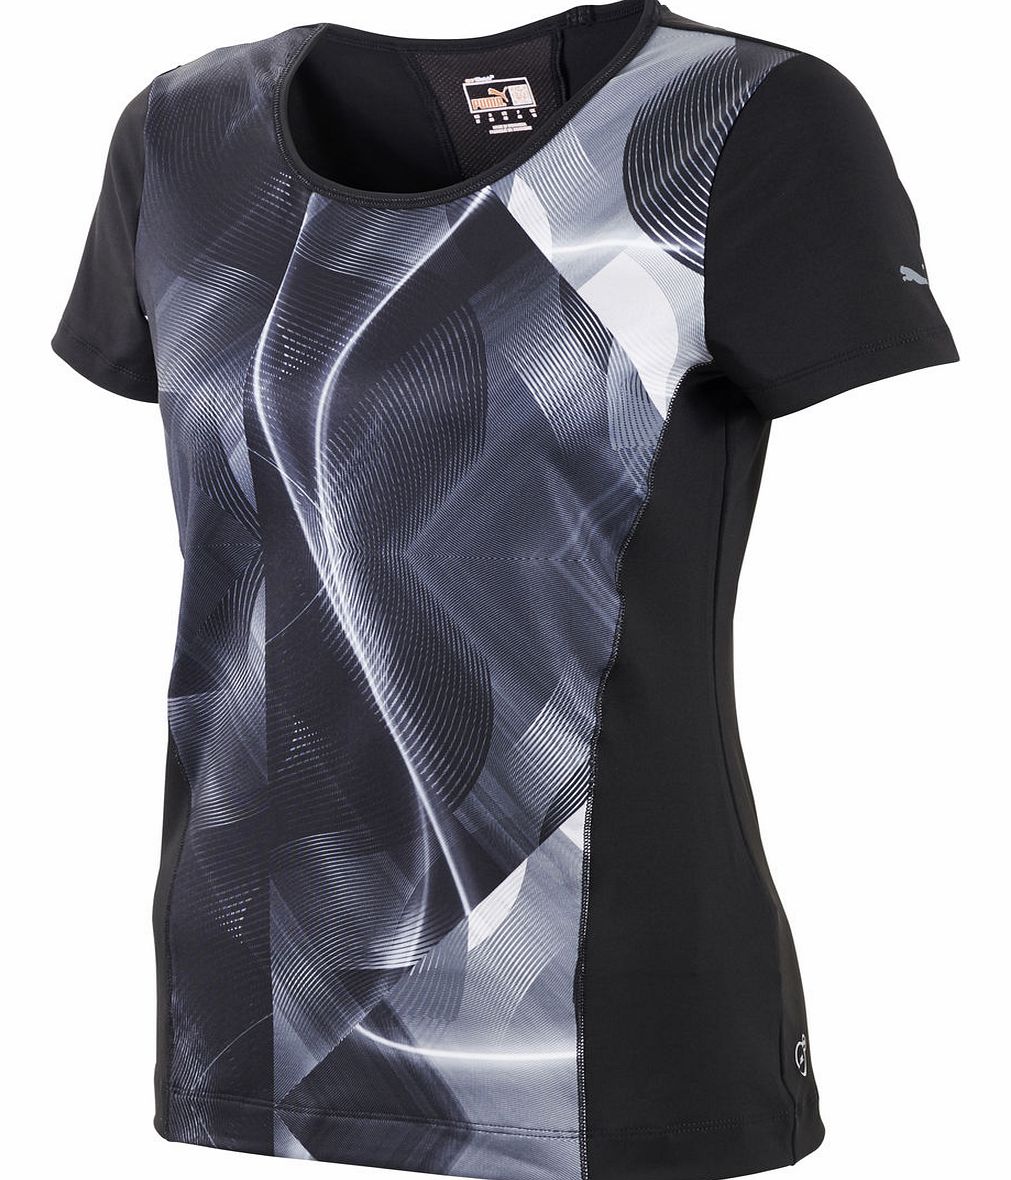 Puma Womans Fitness Graphic T-Shirt - AW14